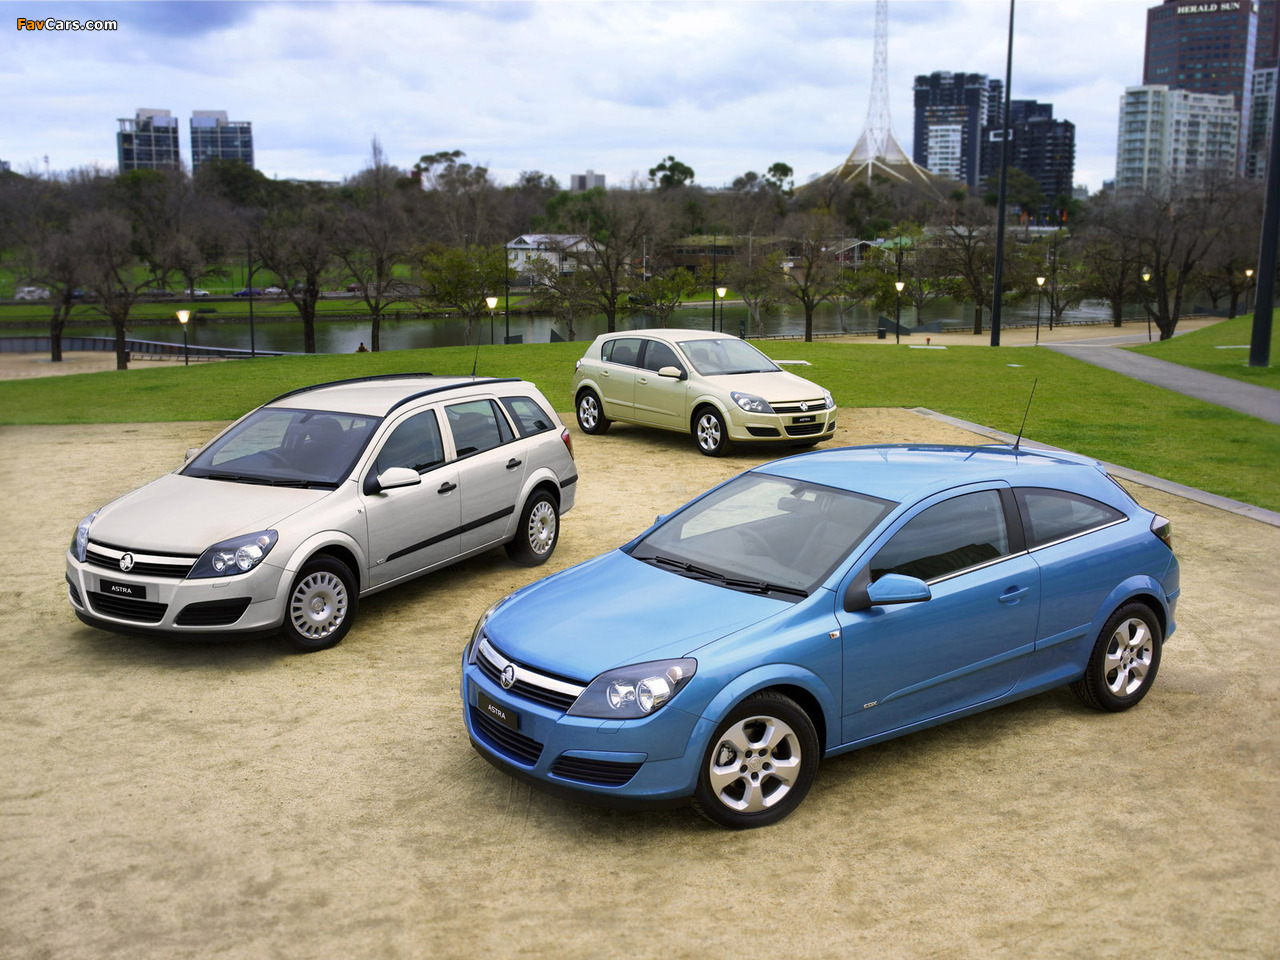 Images of Holden Astra (1280 x 960)